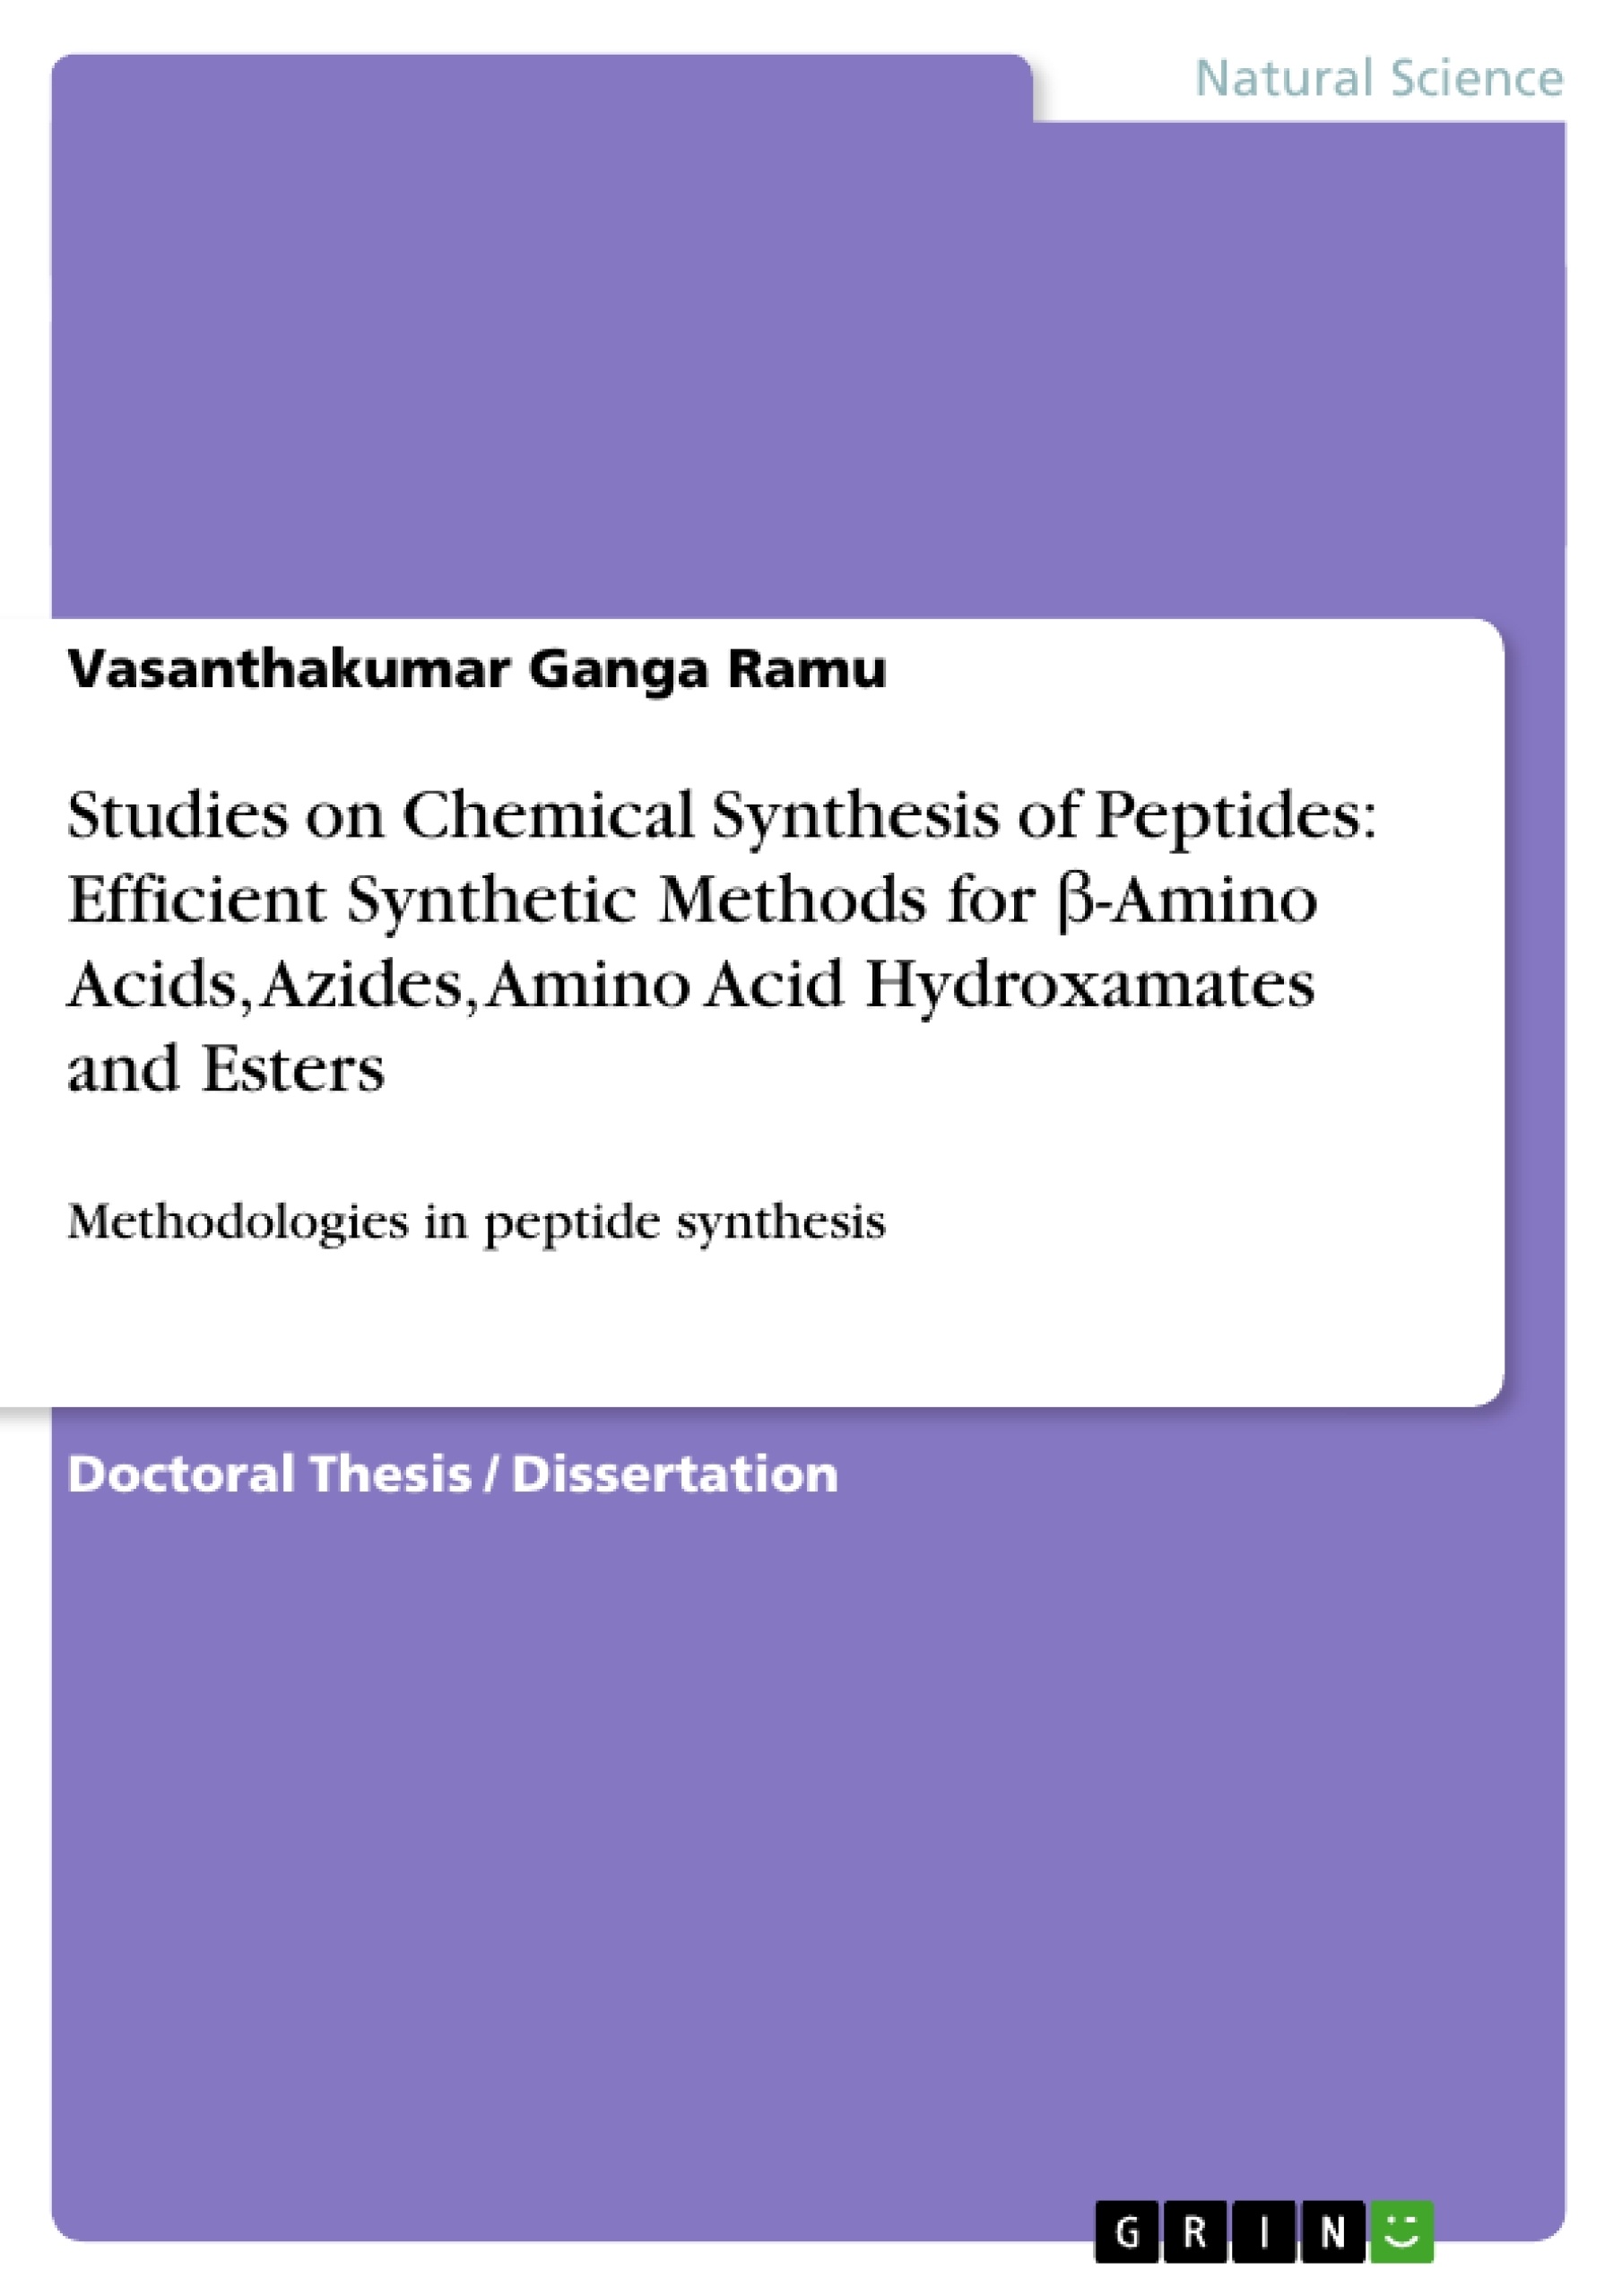 Title: Studies on Chemical Synthesis of Peptides: Efficient Synthetic Methods for β-Amino Acids, Azides, Amino Acid Hydroxamates and Esters